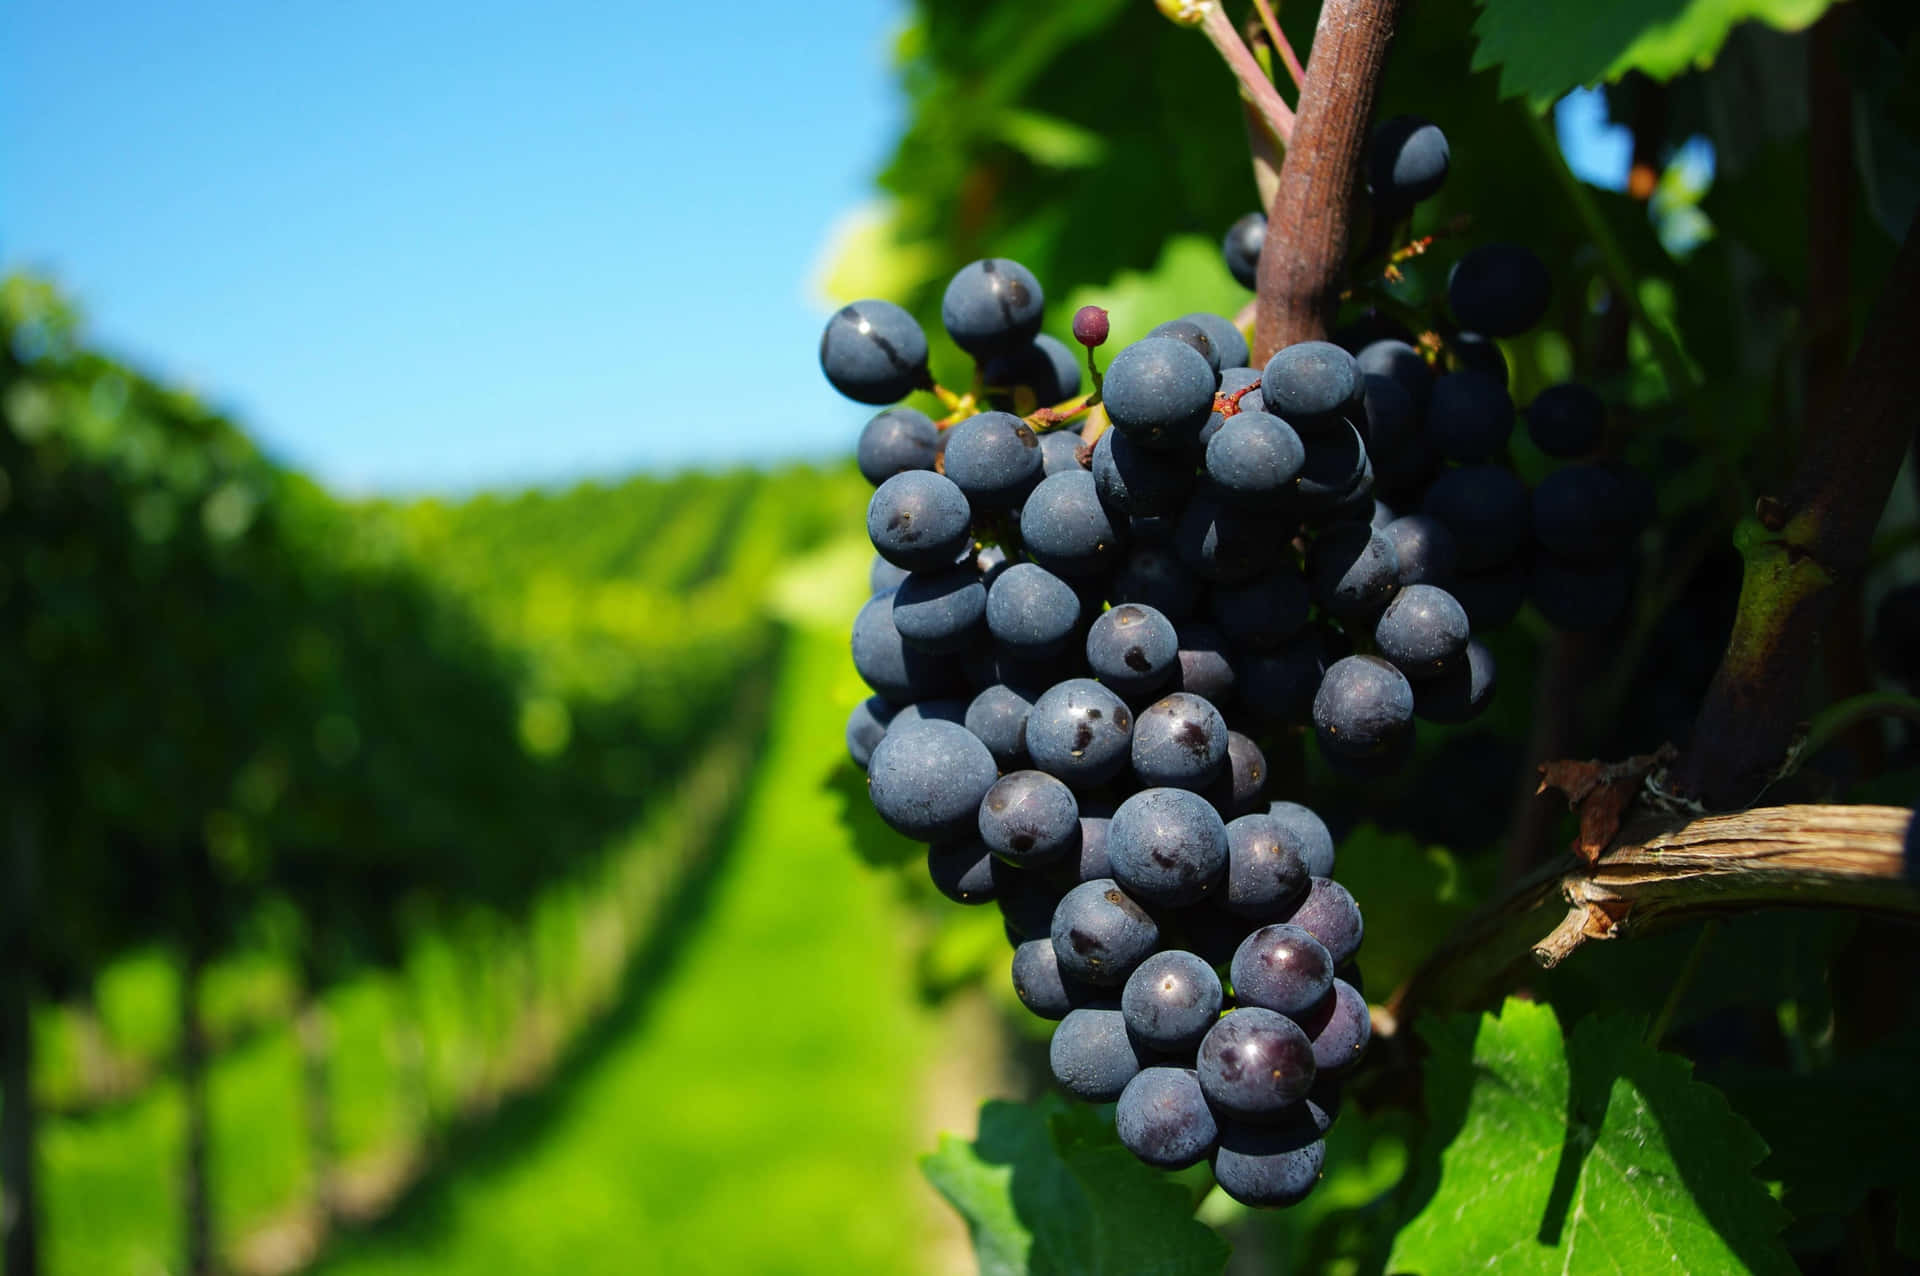 A Bunch Of Black Grapes On A Vine